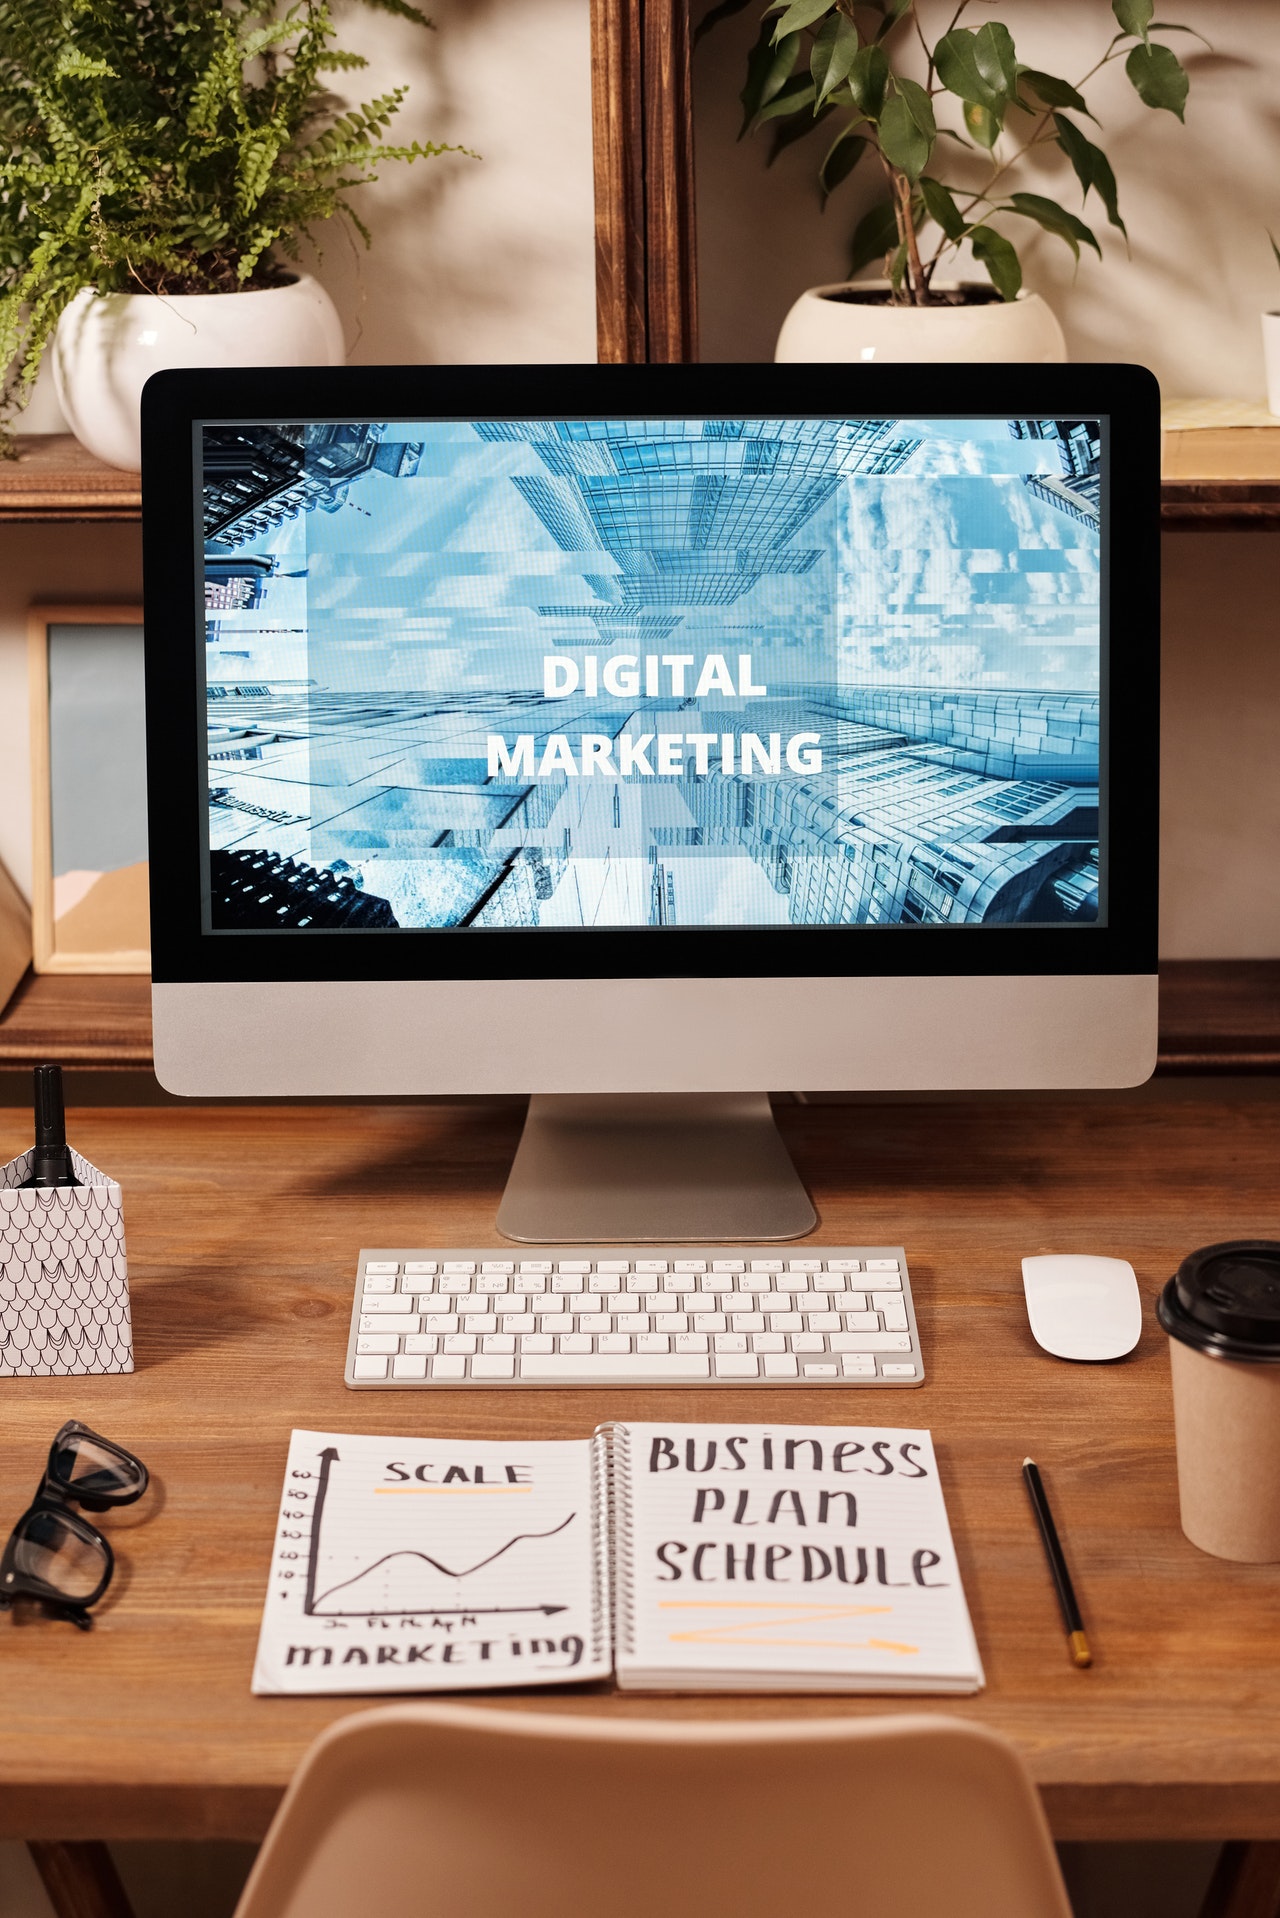 7 Necessary Skills to Master to Become a Successful Digital Marketing